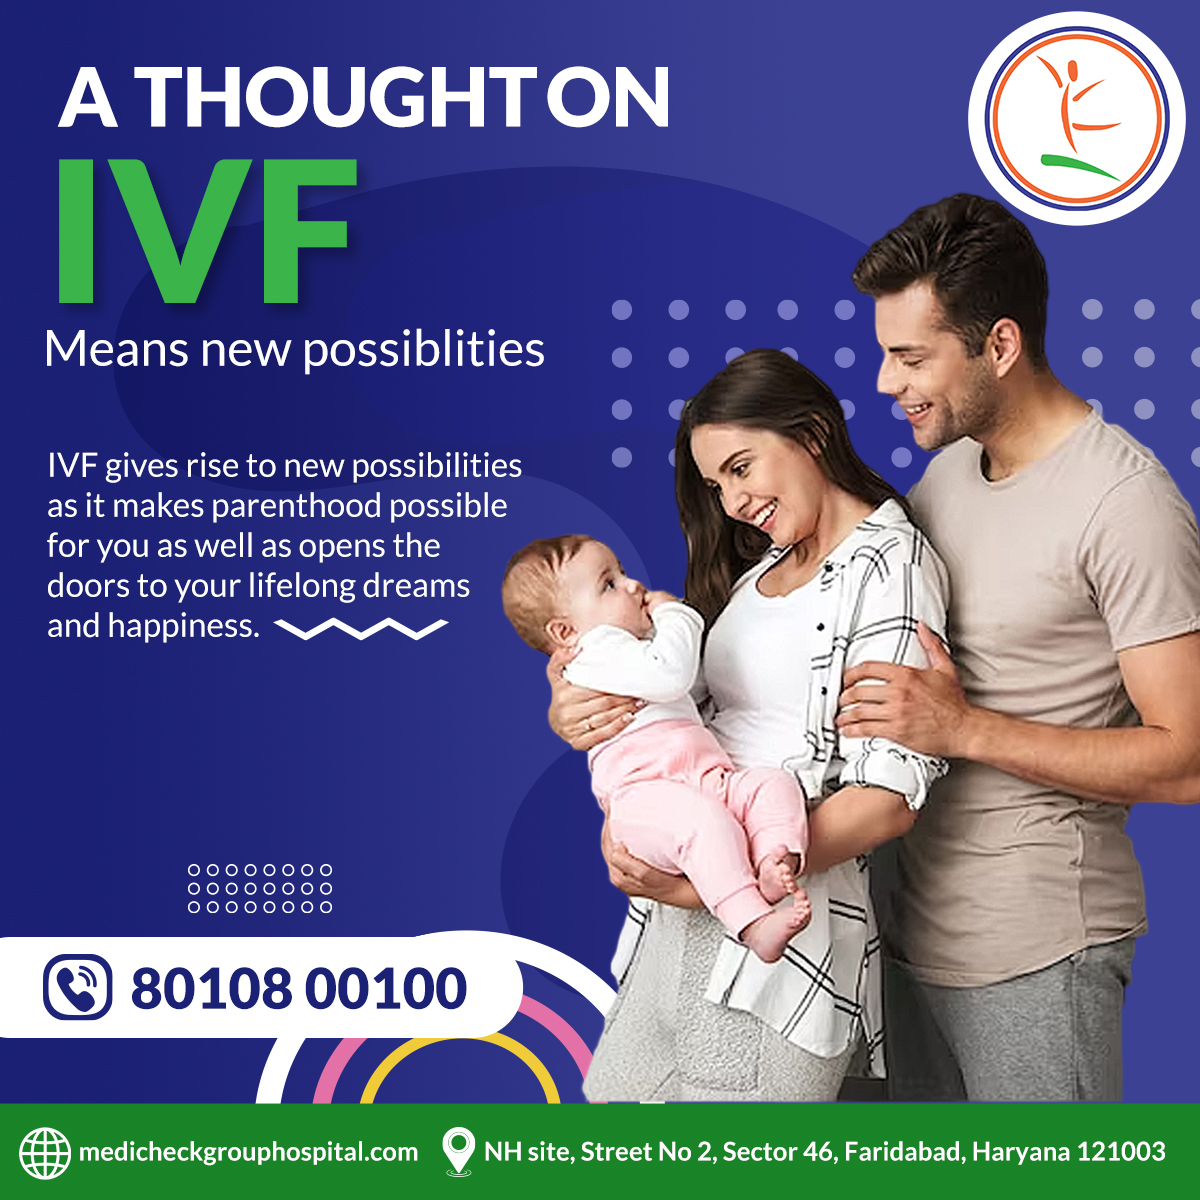 With our strong reputation and commitment to excellence, Medicheck Hospital has become the trusted destination for individuals and couples seeking top-notch infertility care in Faridabad.

📞✉️ Contact us today! 8010800100

#MedicheckHospital #InfertilityCare #IVFClinic